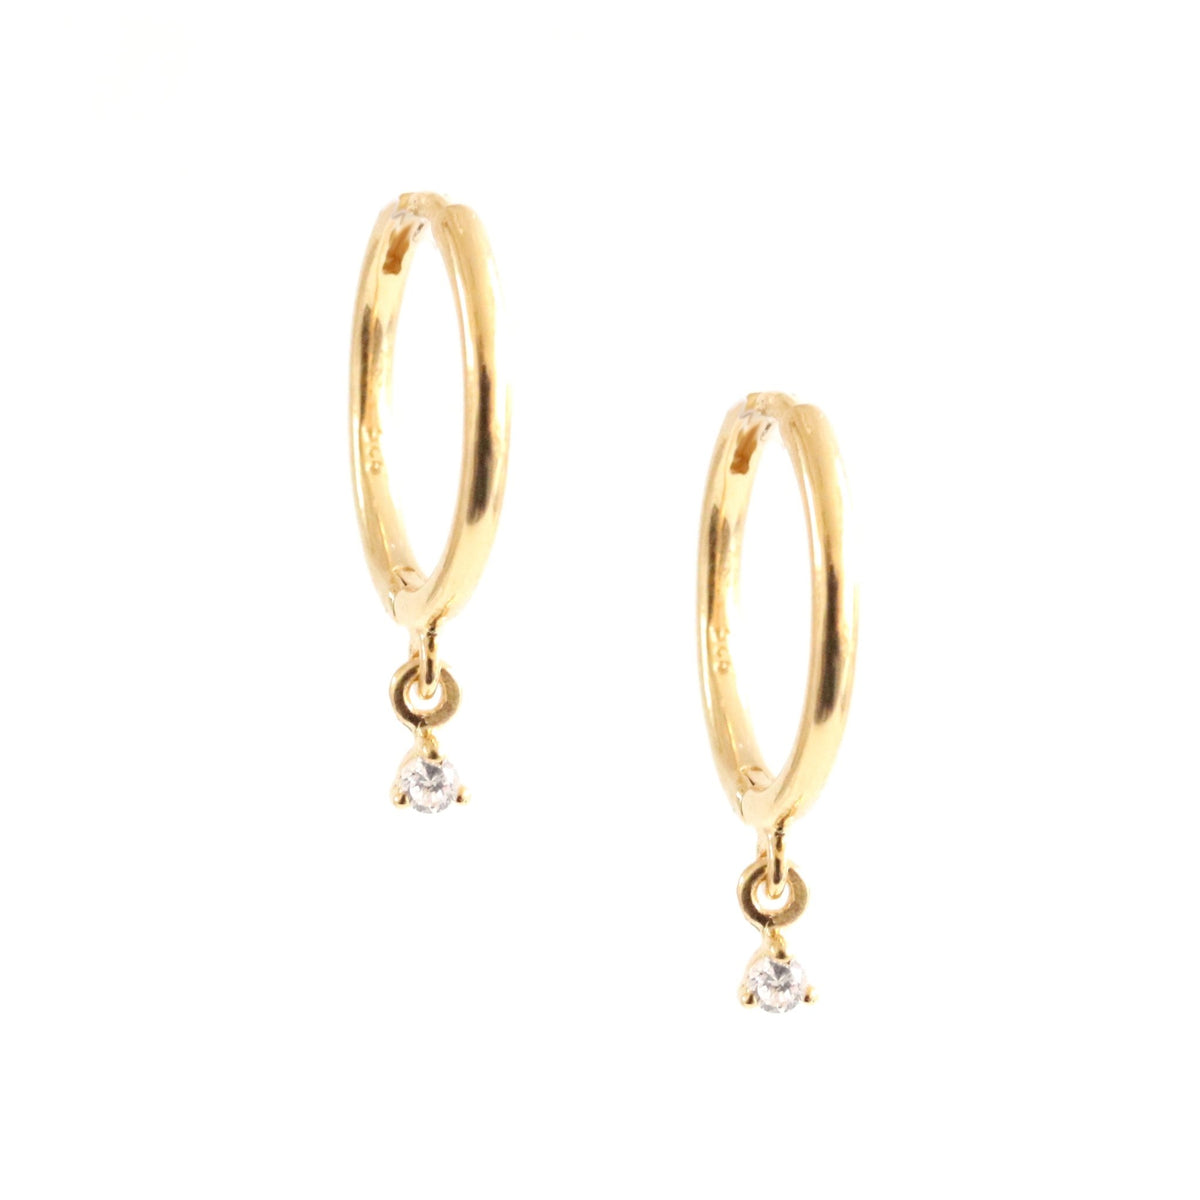 LOVE CHARM HUGGIE HOOPS - CUBIC ZIRCONIA &amp; GOLD - SO PRETTY CARA COTTER